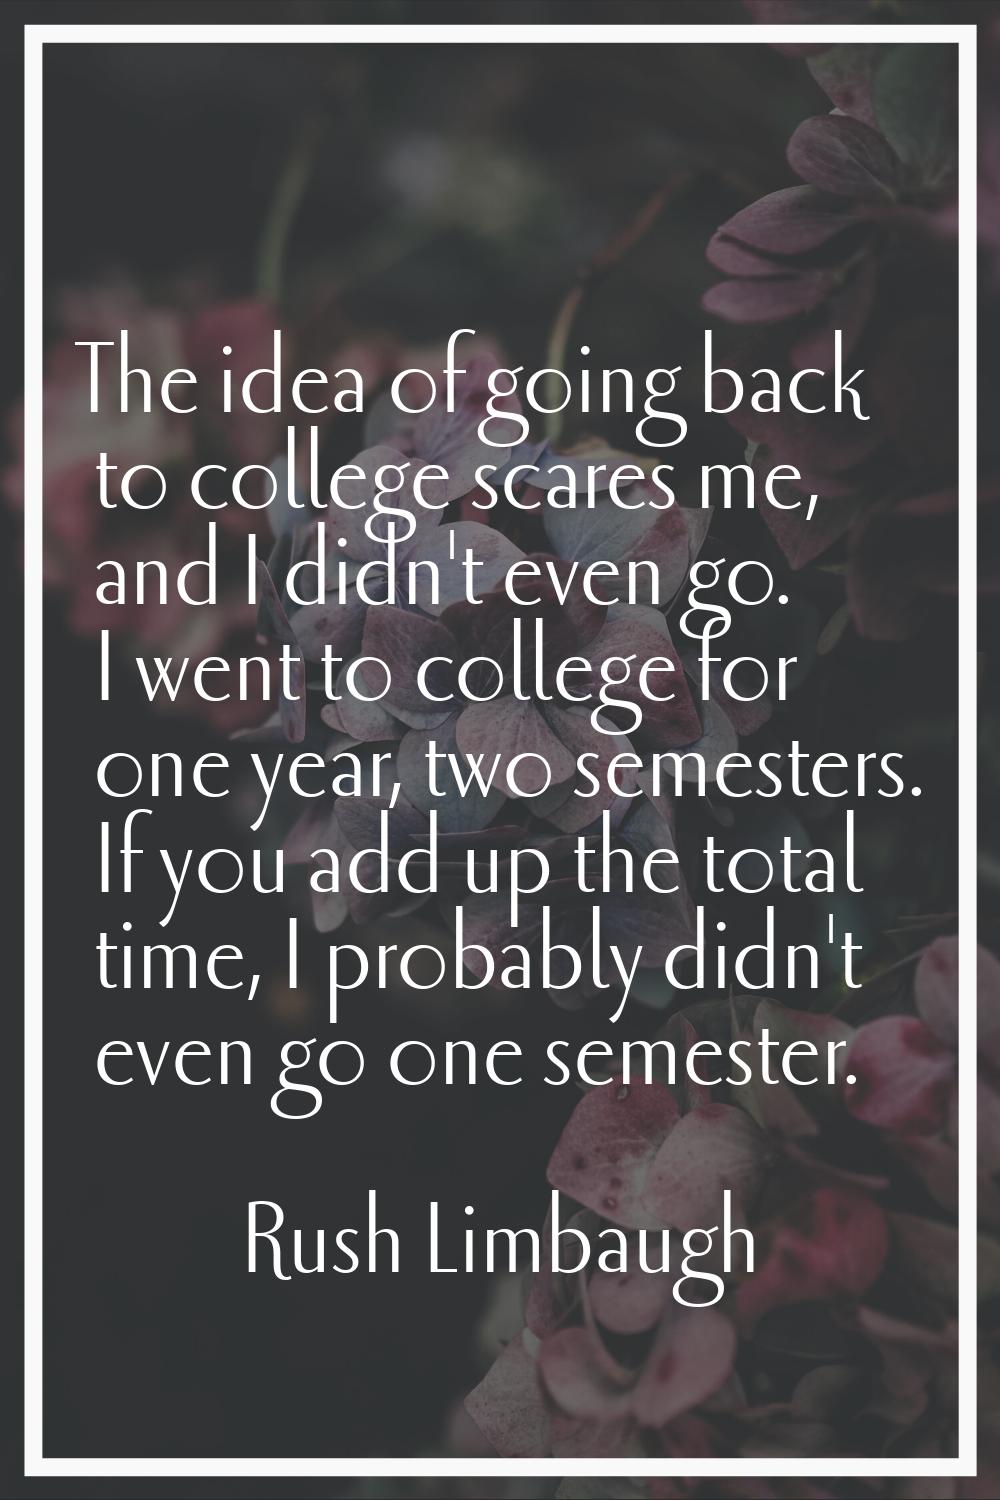 The idea of going back to college scares me, and I didn't even go. I went to college for one year, 